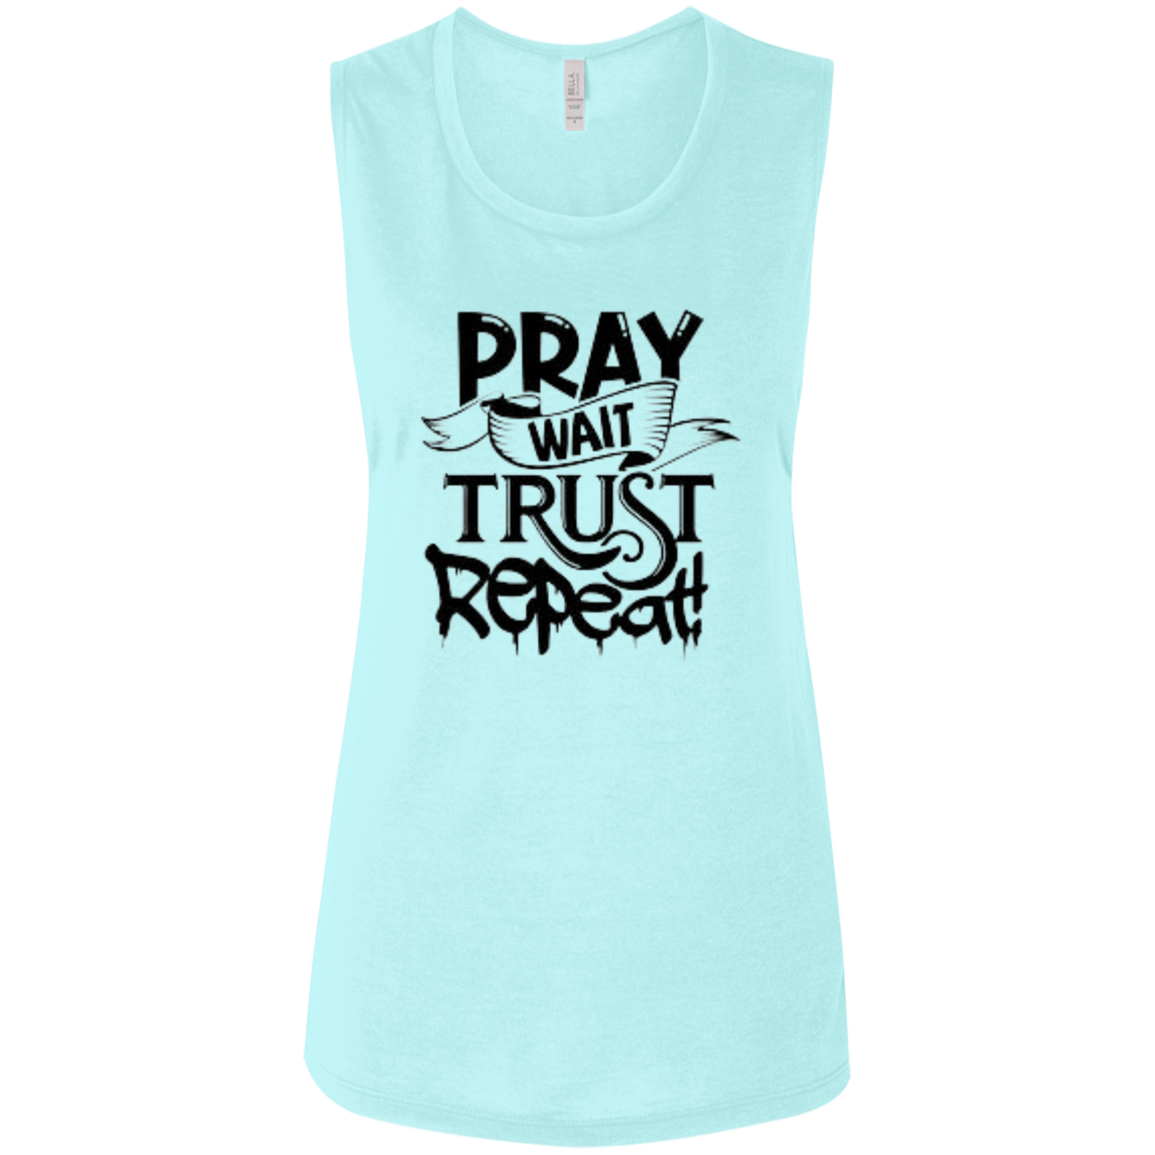 Pray Wait Trust Repeat Ladies' Flowy Muscle Tank, Pray Wait Trust Repeat For Women, Shirt for Women, Christian Shirts for Women, Jesus Shirt, Gift for Women, Gift for Her, Christian Clothing